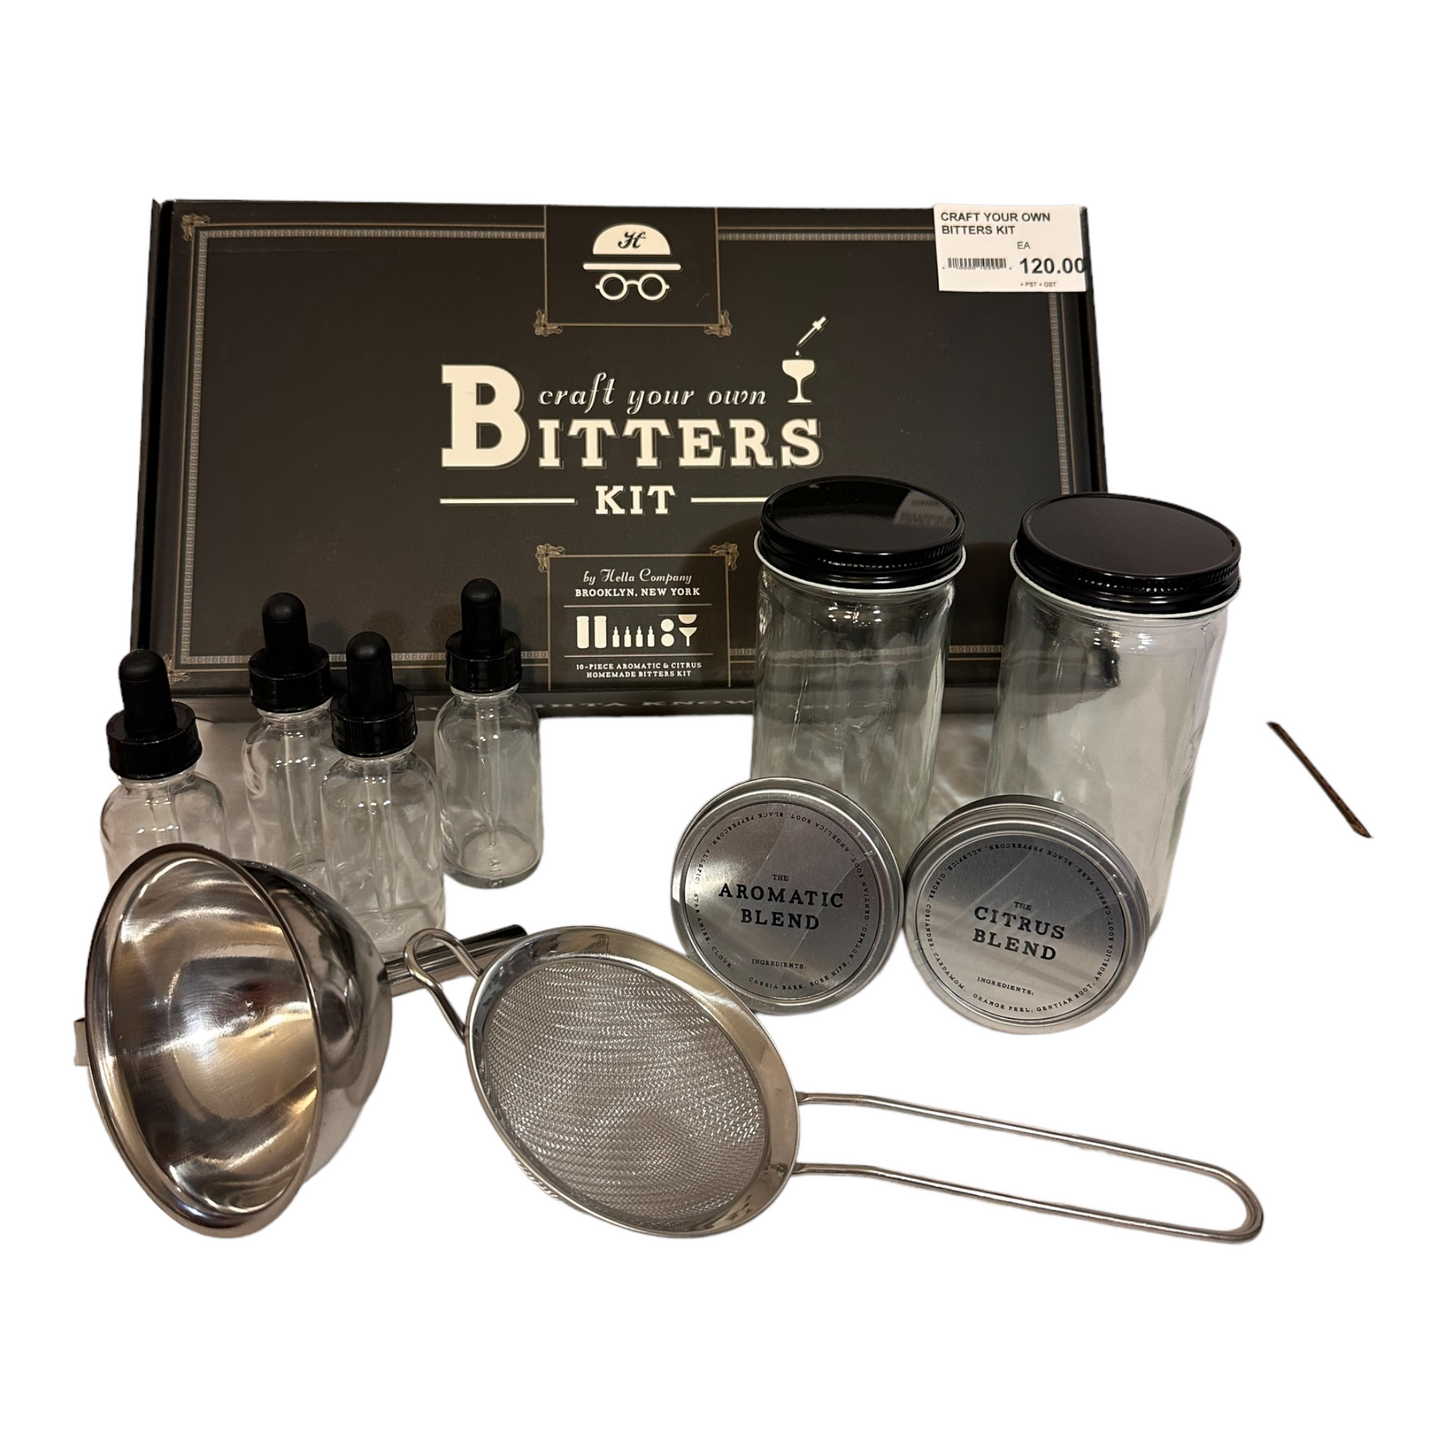 CRAFT YOUR OWN BITTERS KIT